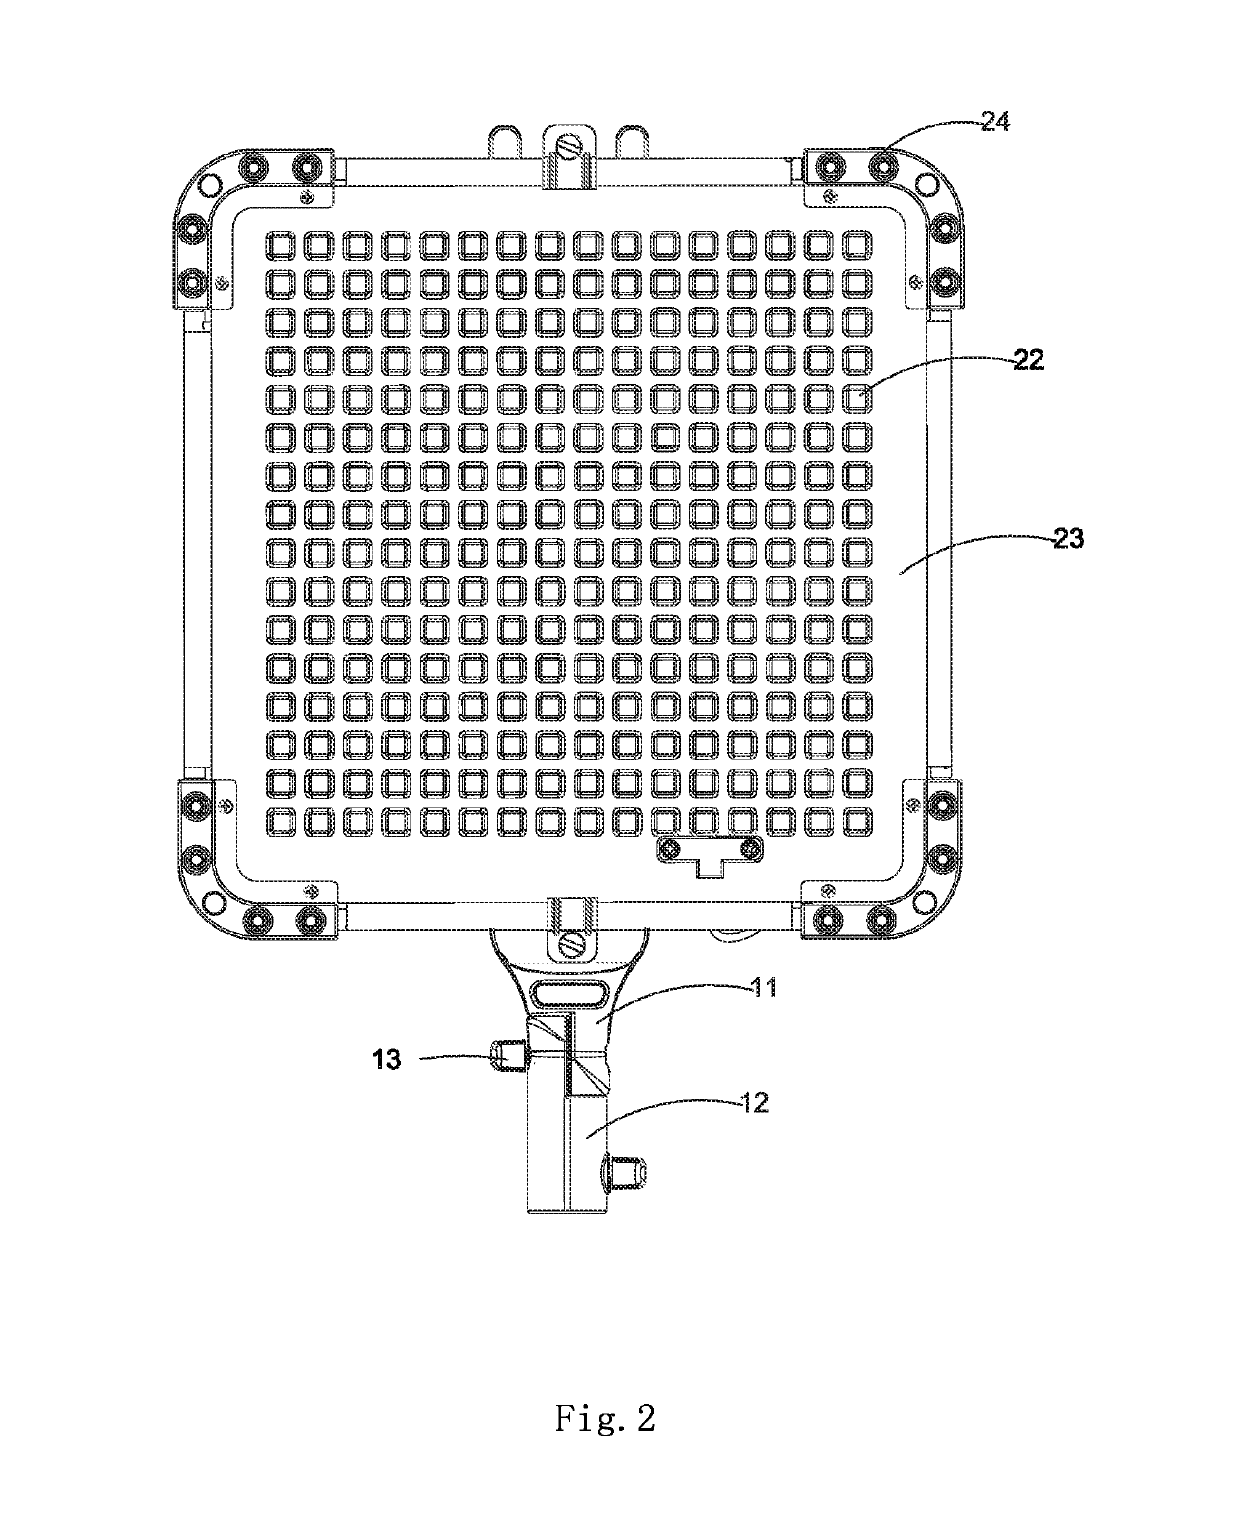 Set Light Fixture and Application of Same